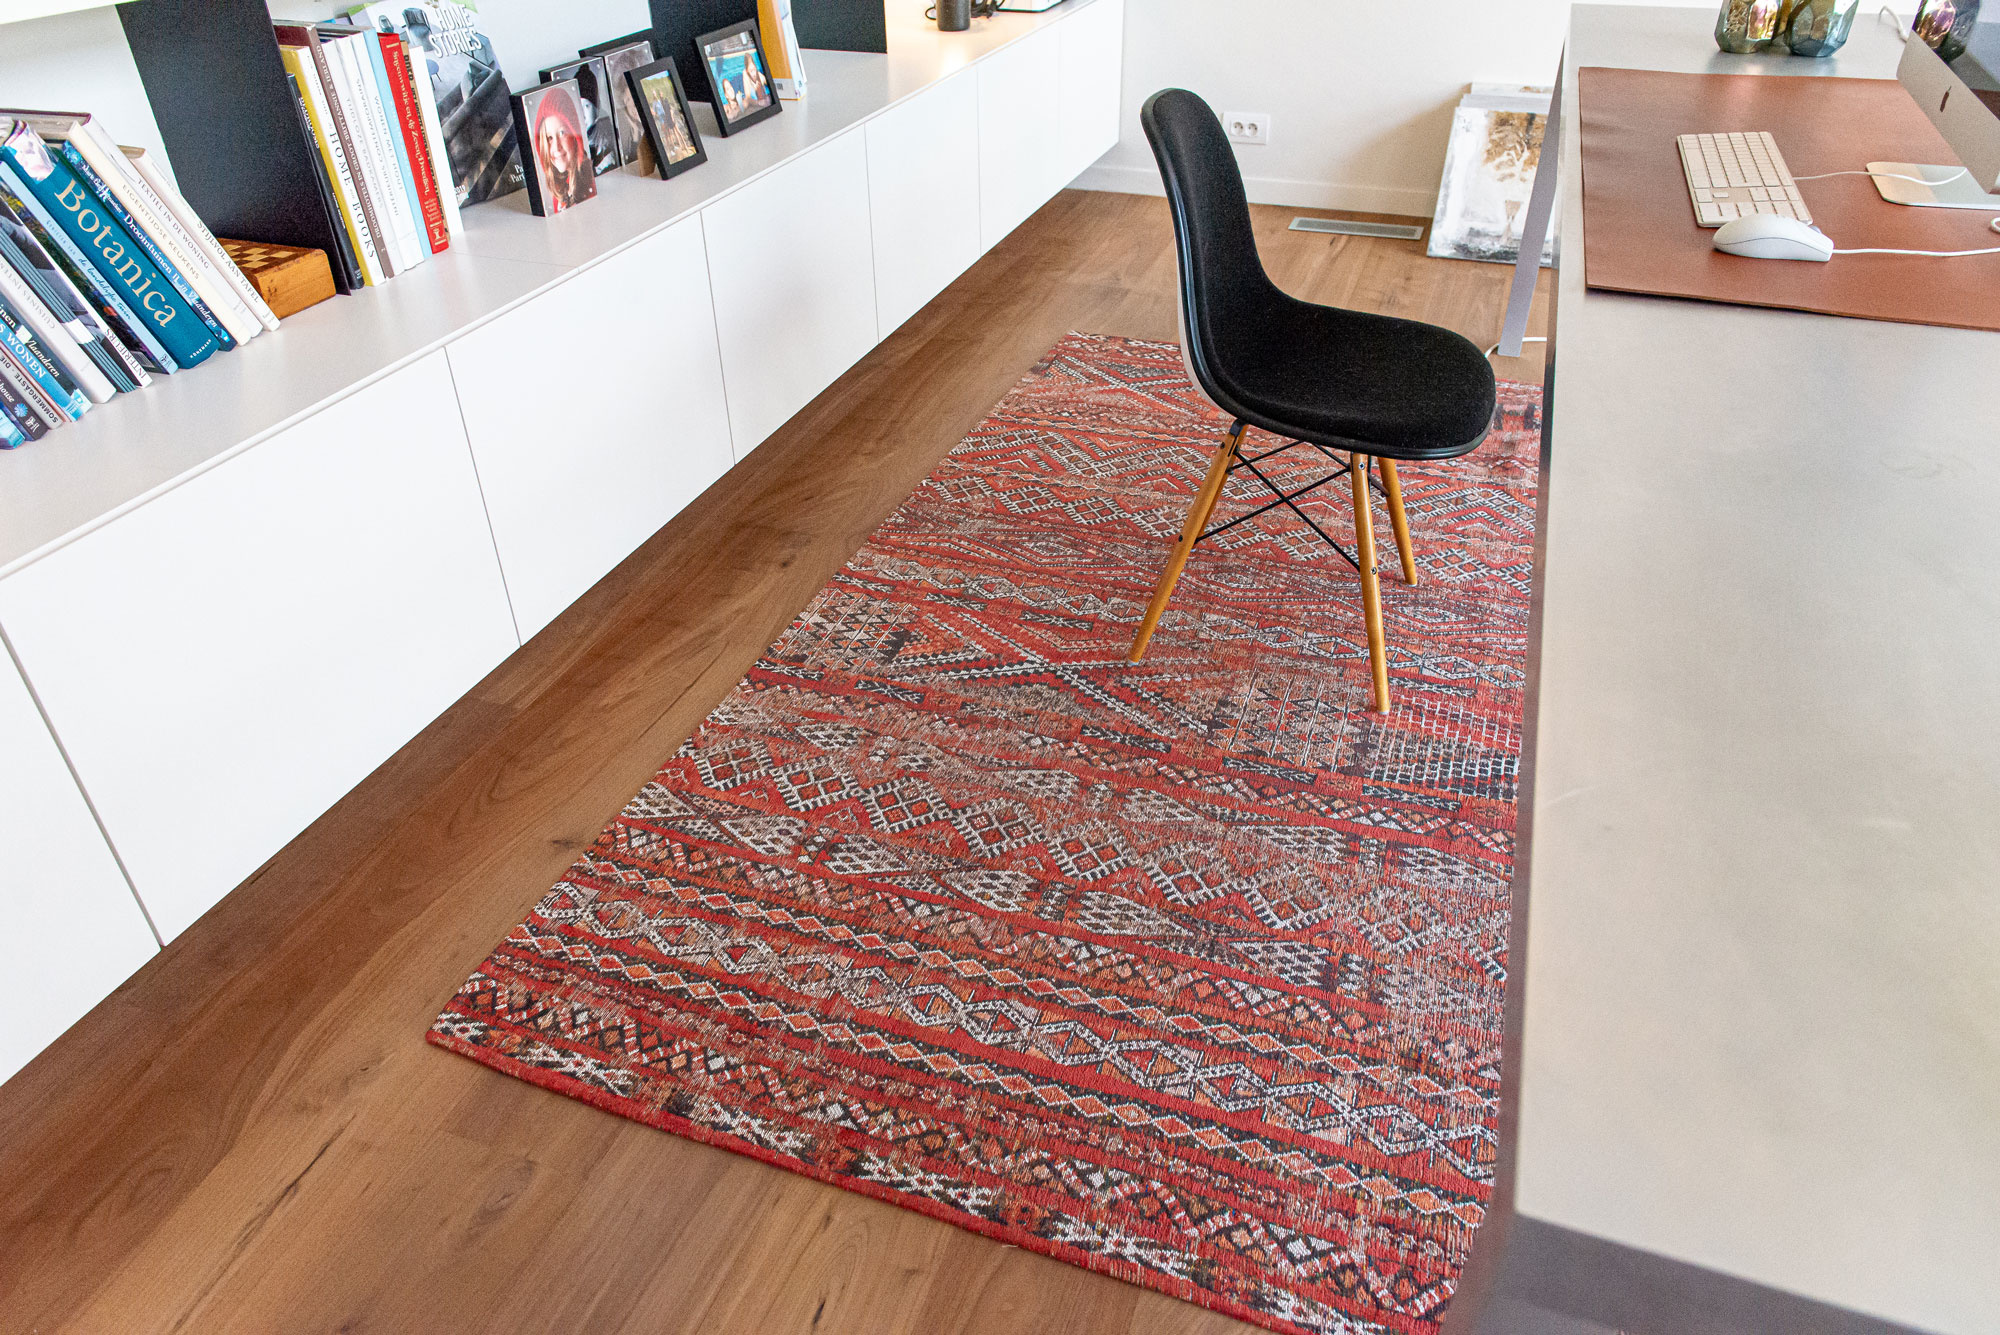 Fez Red 9115 Rug ☞ Size: 200 x 280 cm